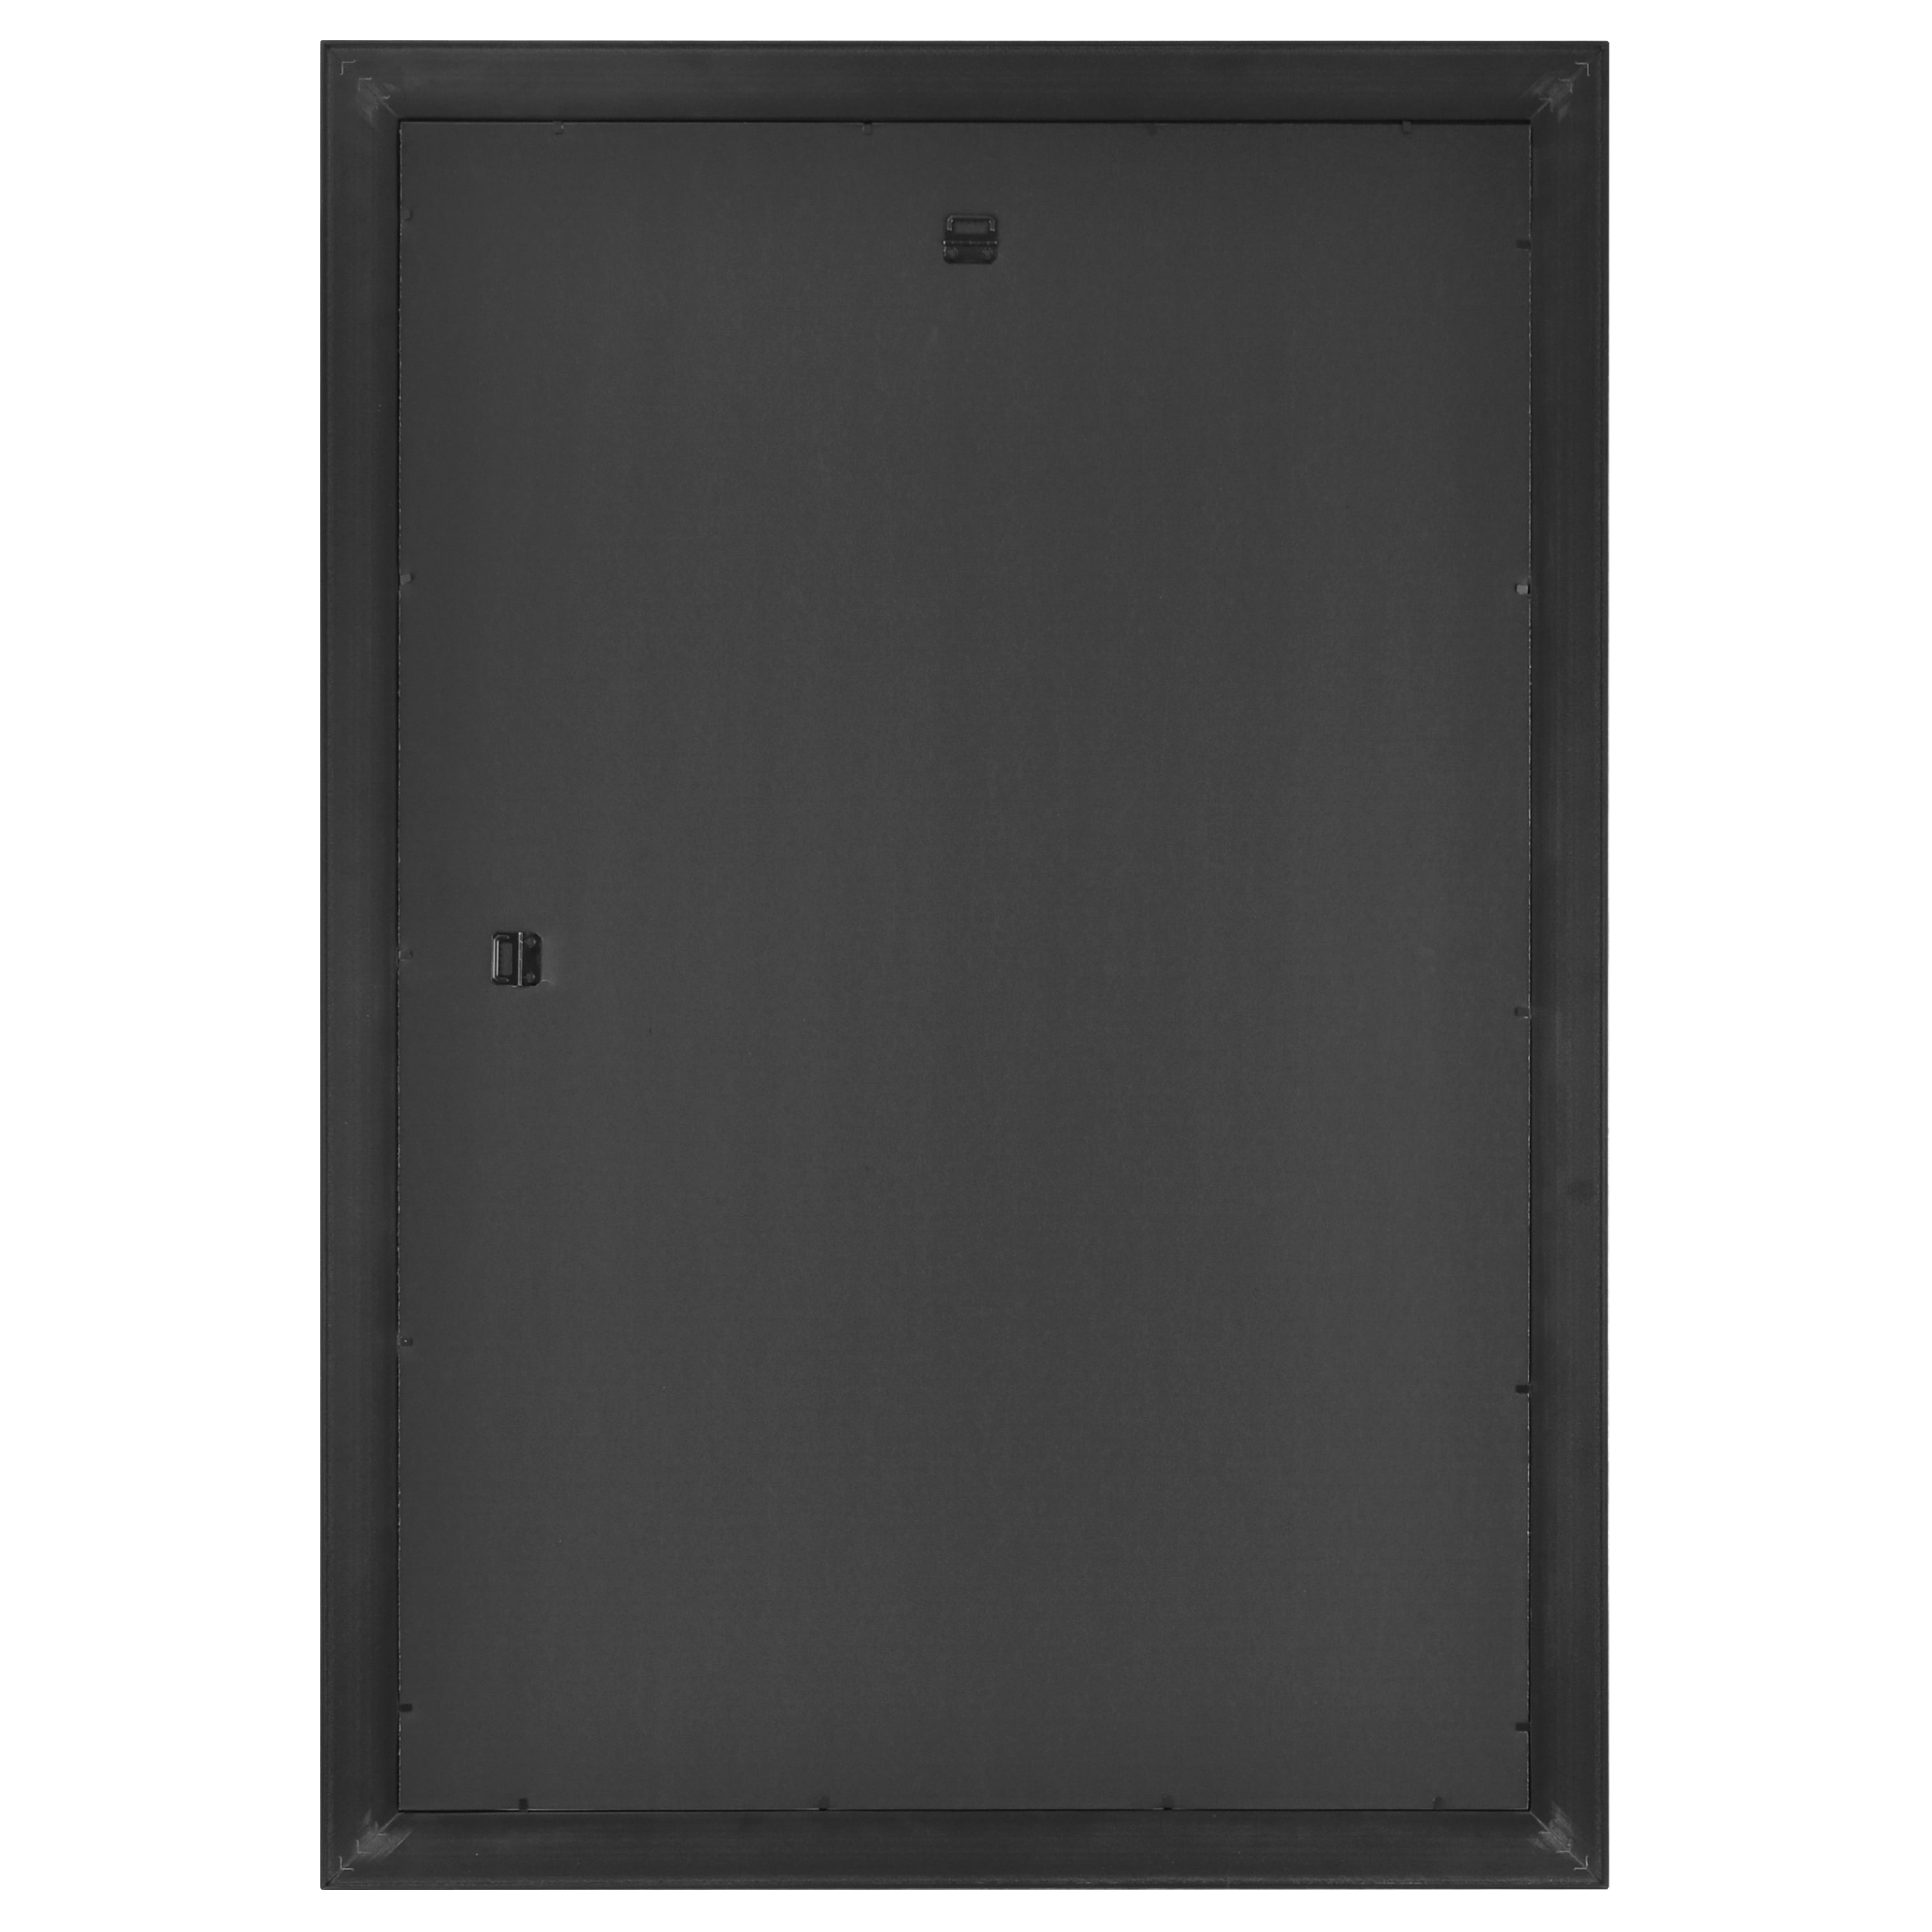 Mainstays 20 inchx28 inch Black Rounded Poster Frame Set of 3, Size: 20 inch x 28 inch